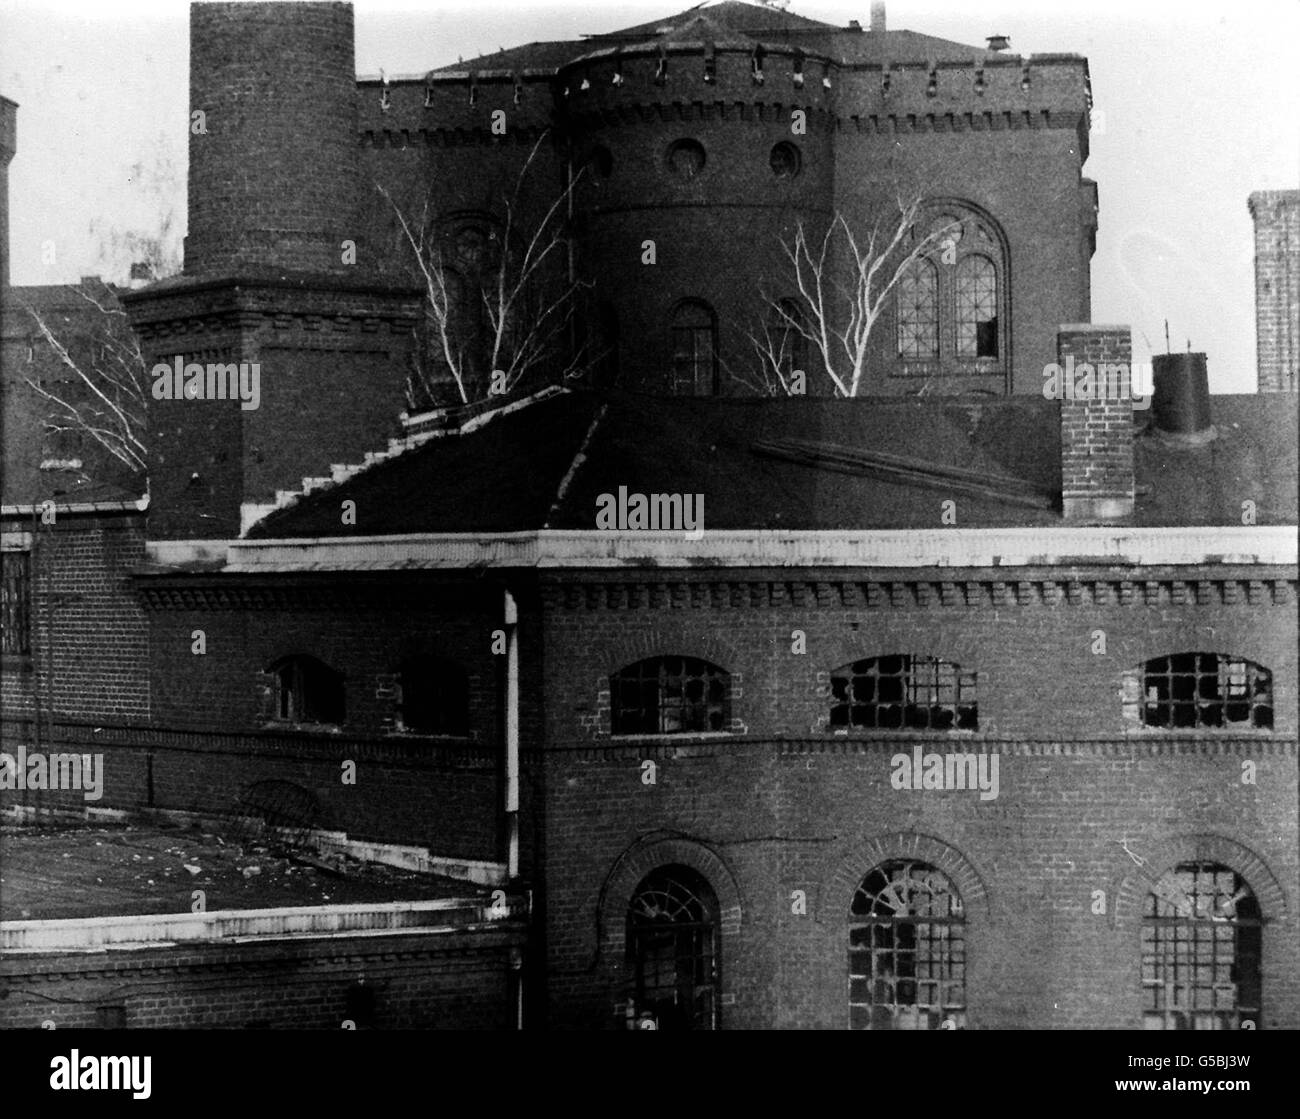 SPANDAU PRISON 1982: A section of the half-derelict Spandau Prison in the British sector of West Berlin, Germany. The prison is home of Adolf Hitler's former Deputy, Rudolf Hess (d.1987). Stock Photo